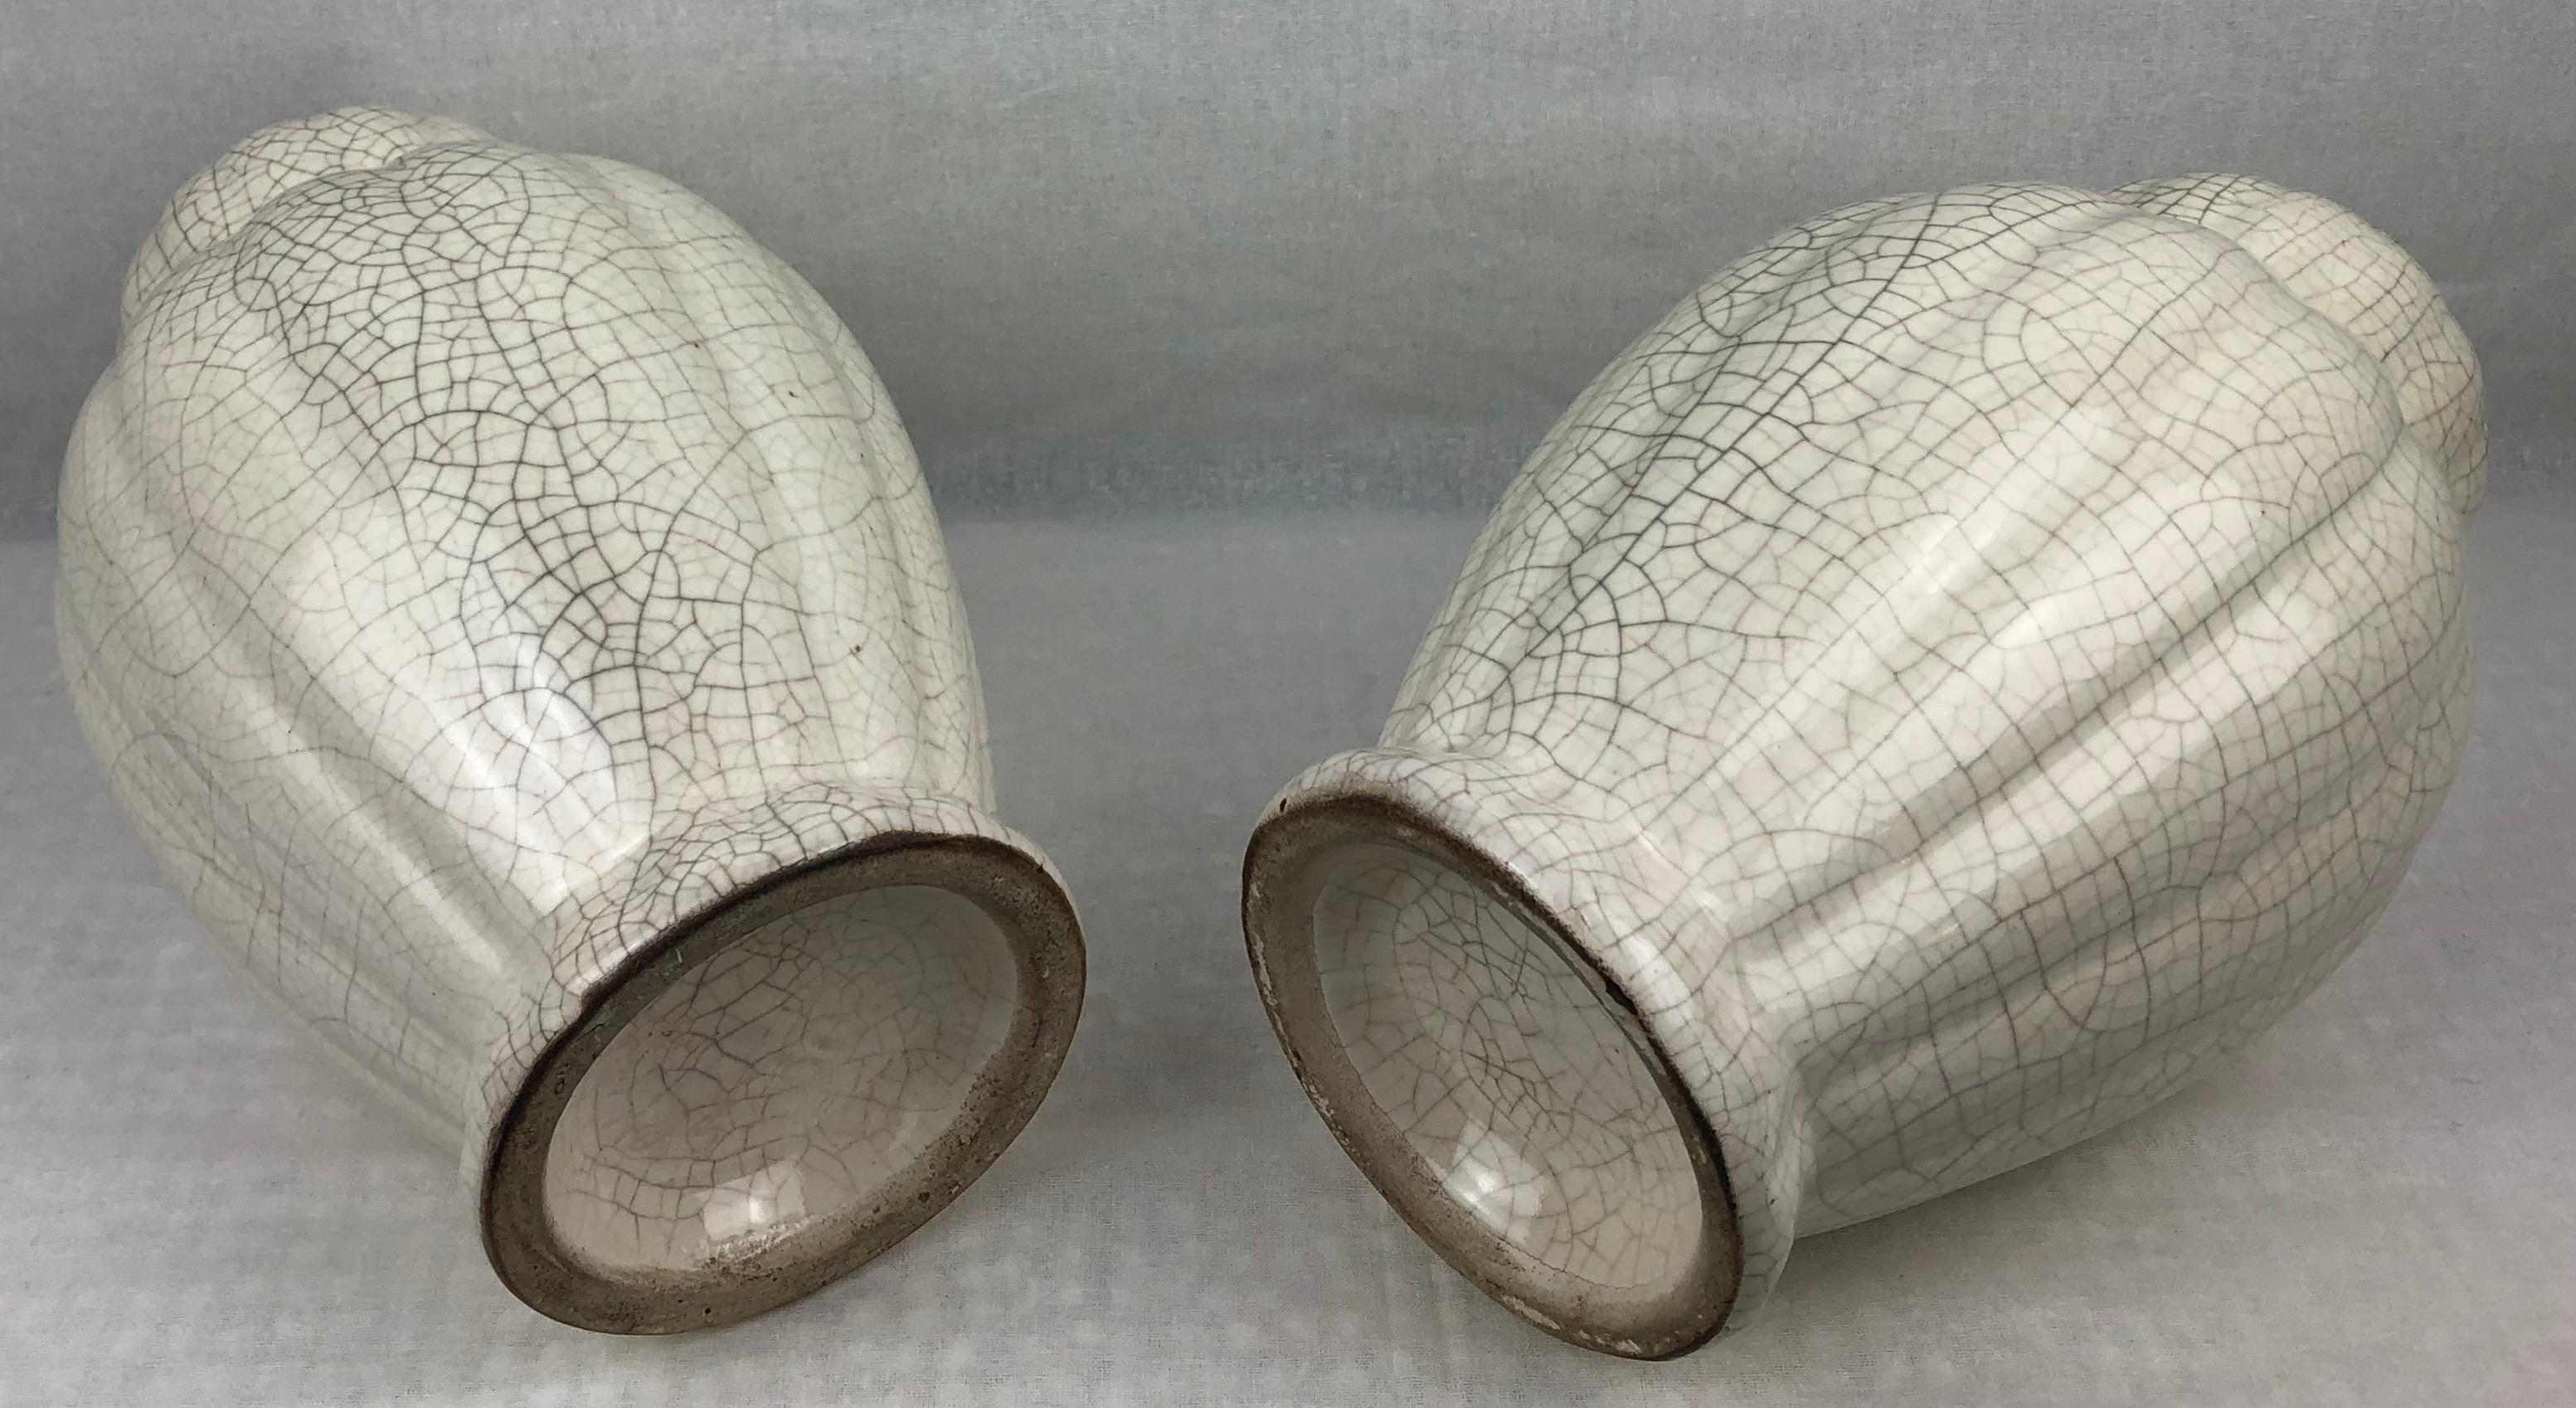 Stunning pair of Art Deco ceramic vases by Saint Clement with white crackle glaze finish. The crackle clear glaze was a popular technique for animal and figural statues as well as decorative vases during the Art Deco period in France. Most of those